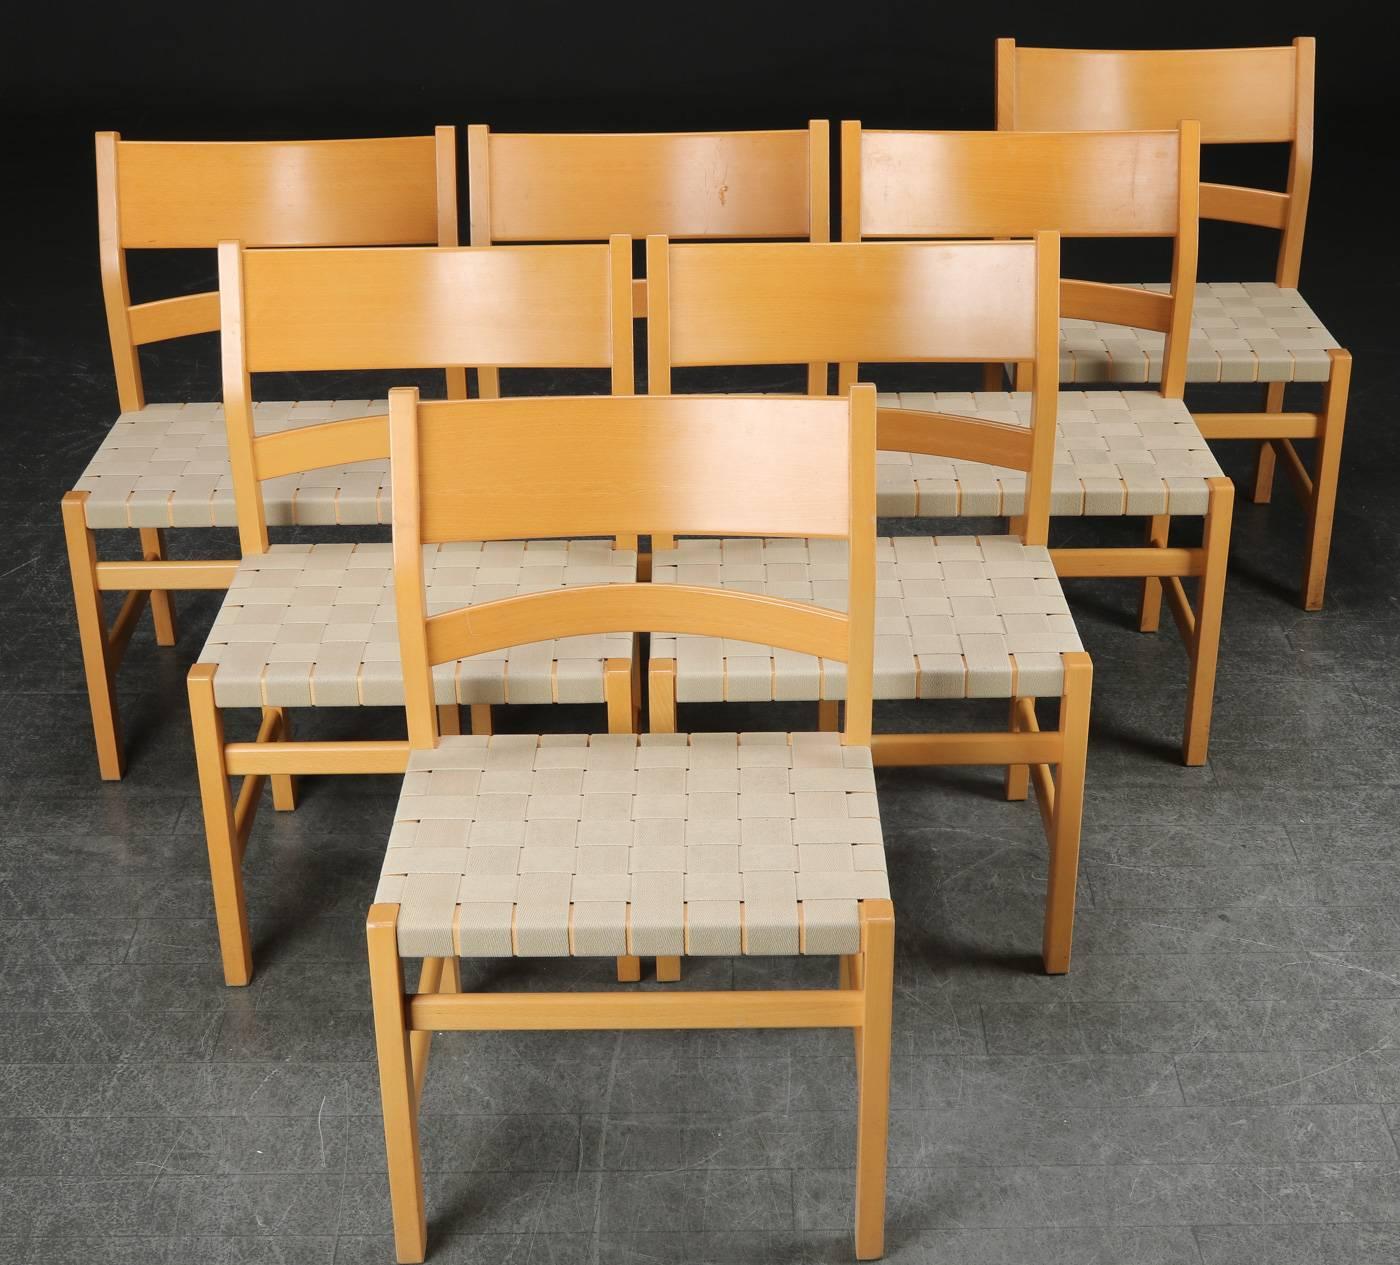 1980s set of seven Koldinghus dining chairs named after the old Danish castle Koldinghus designed by Hans J. Wegner in conjunction with a major restauration of the castle in the late 1980´s.

The beech chairs have the well known elegant Wegner